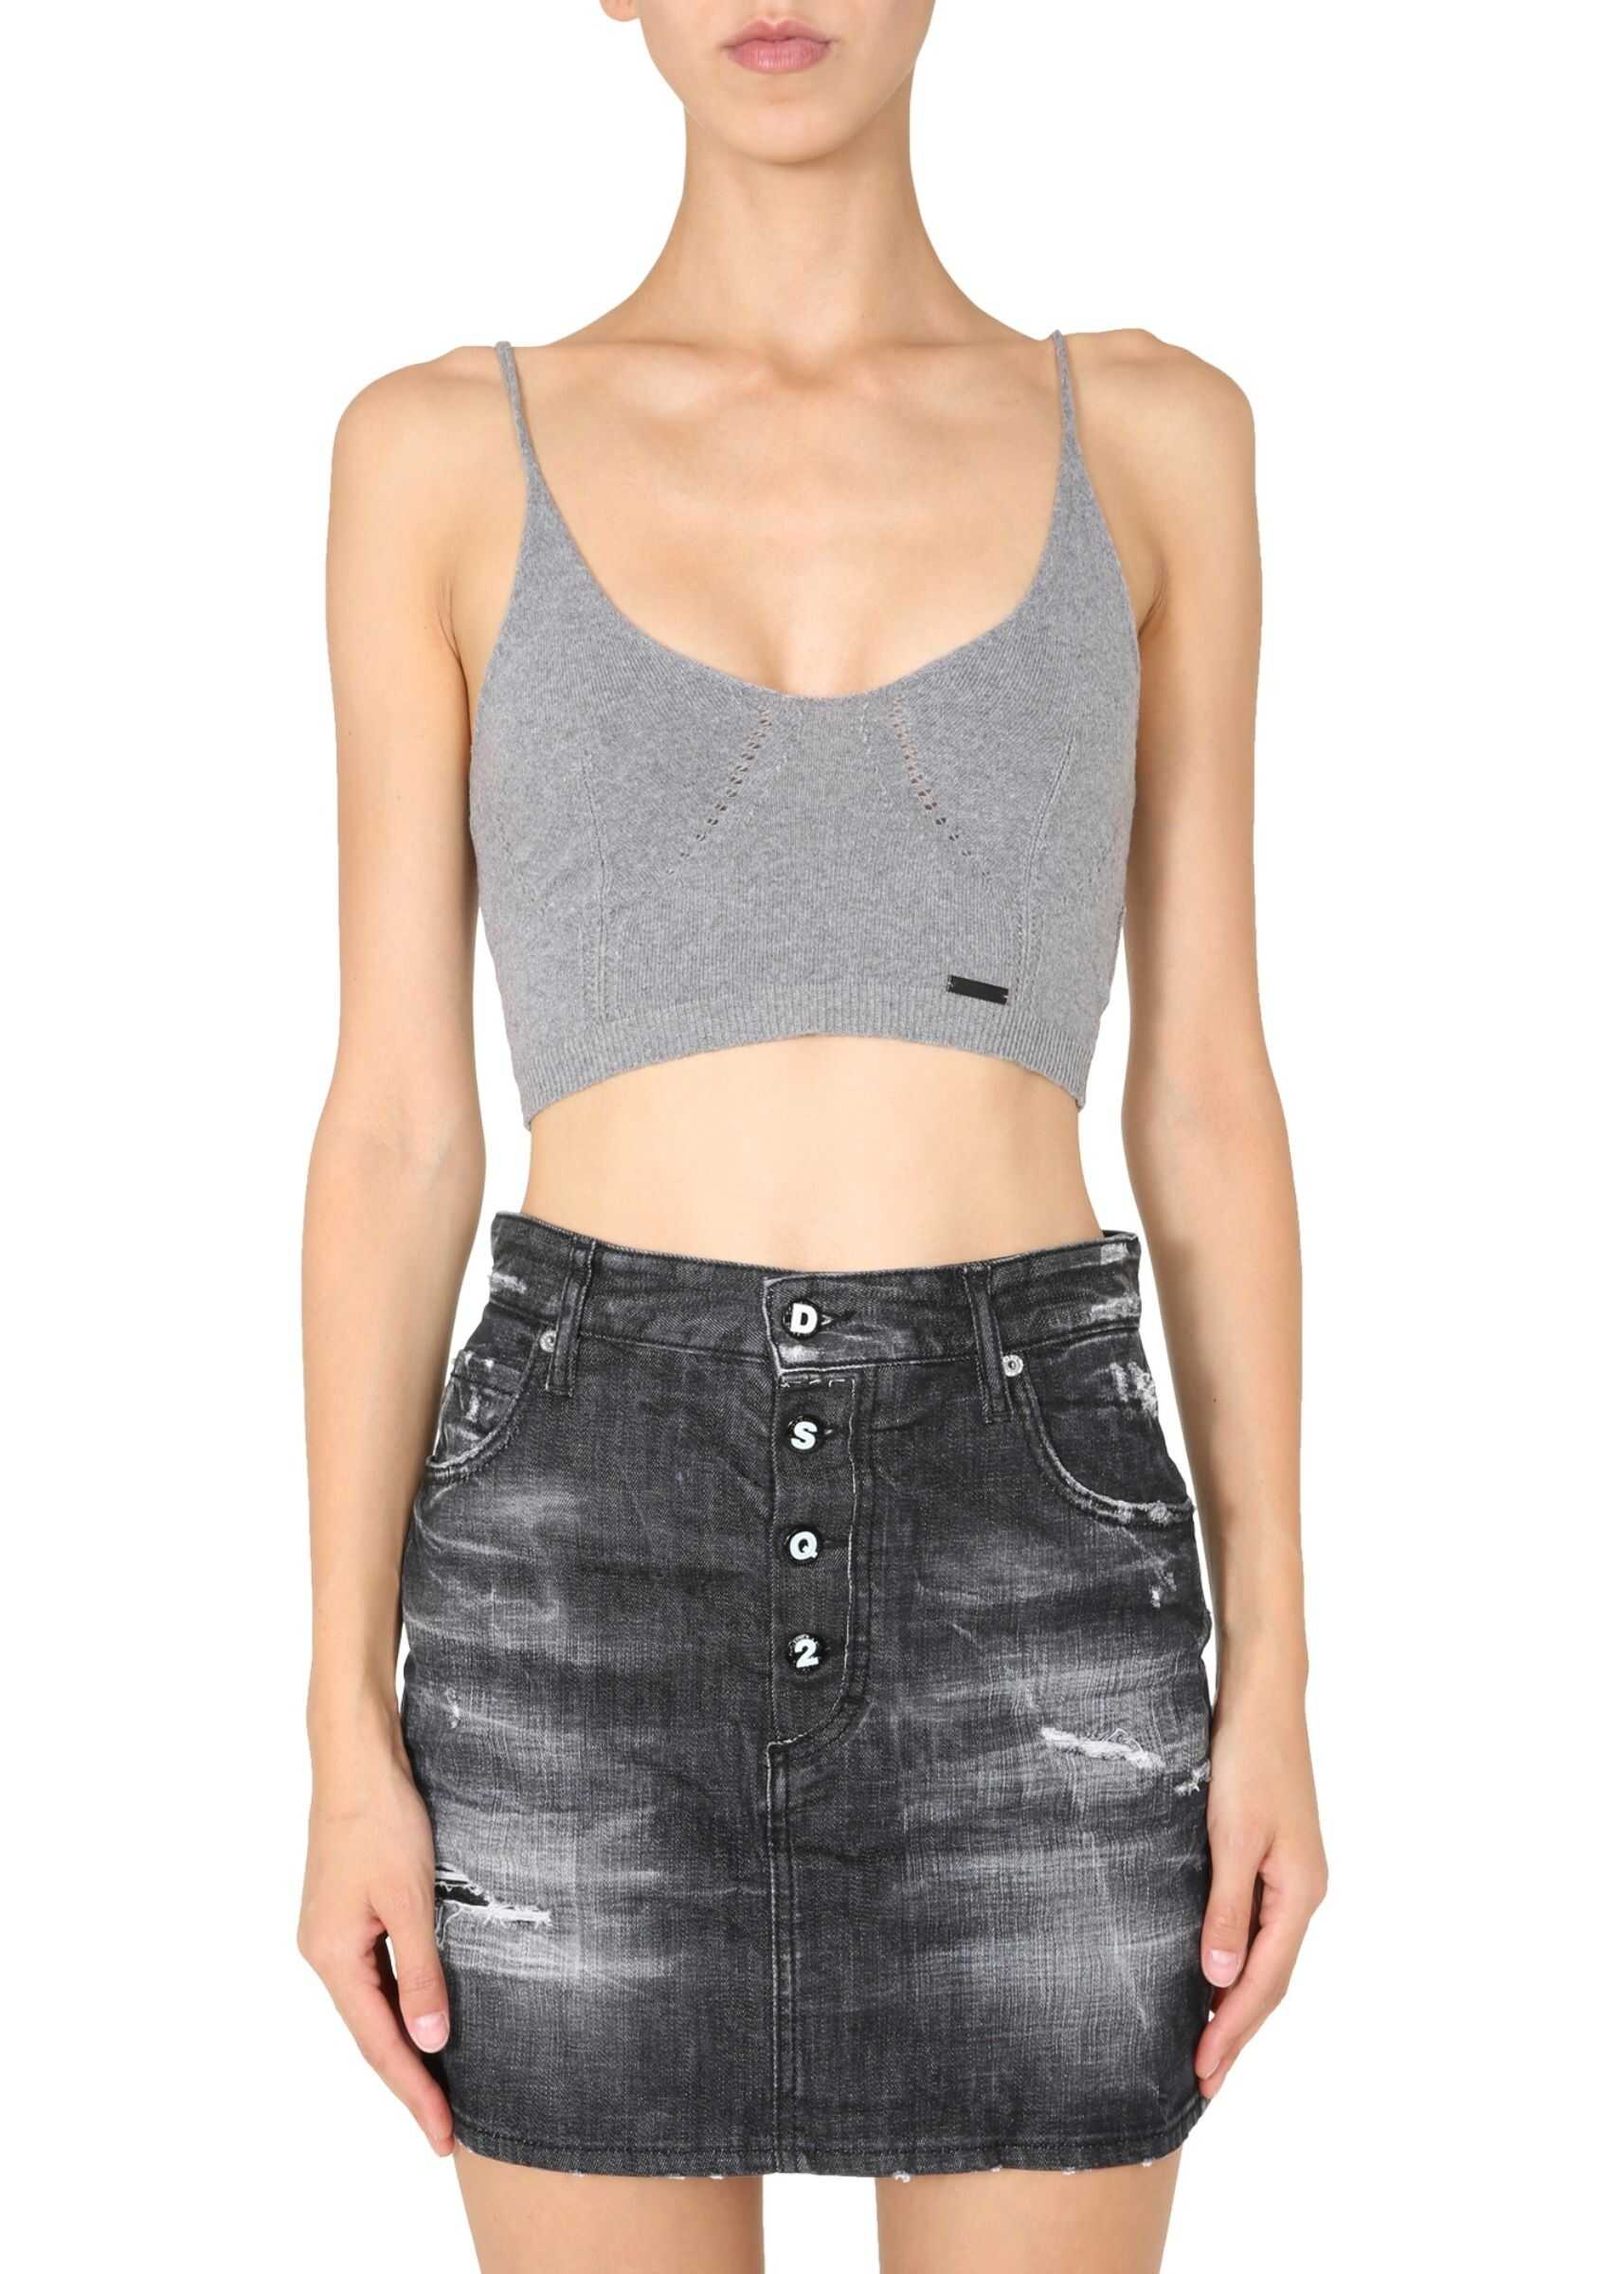 DSQUARED2 Knitted Top S72HA0947_S17517858 GREY b-mall.ro imagine 2022